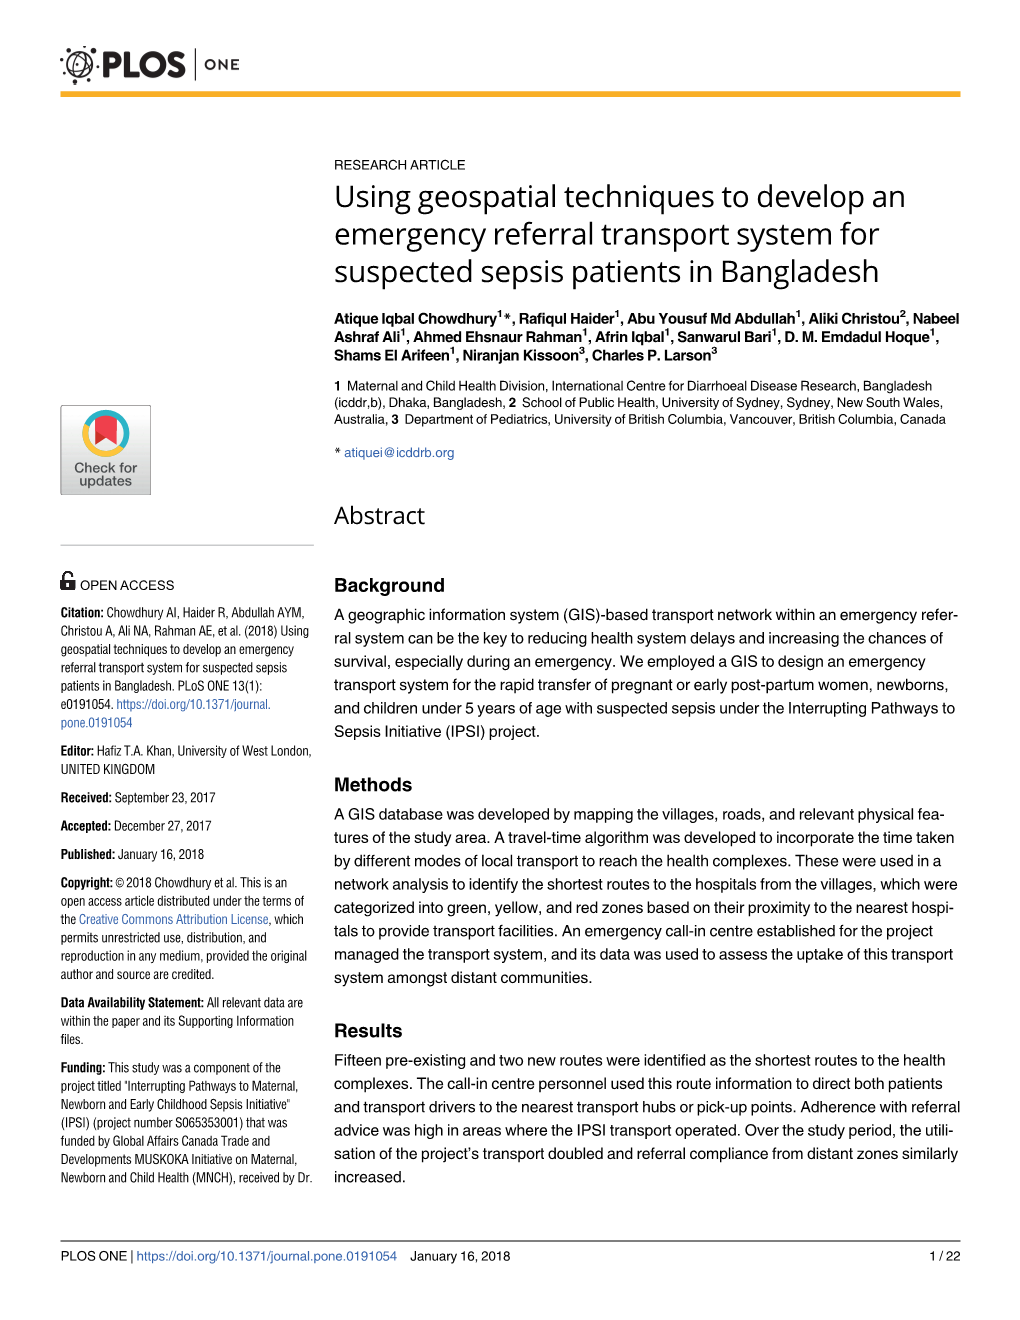 Using Geospatial Techniques to Develop an Emergency Referral Transport System for Suspected Sepsis Patients in Bangladesh